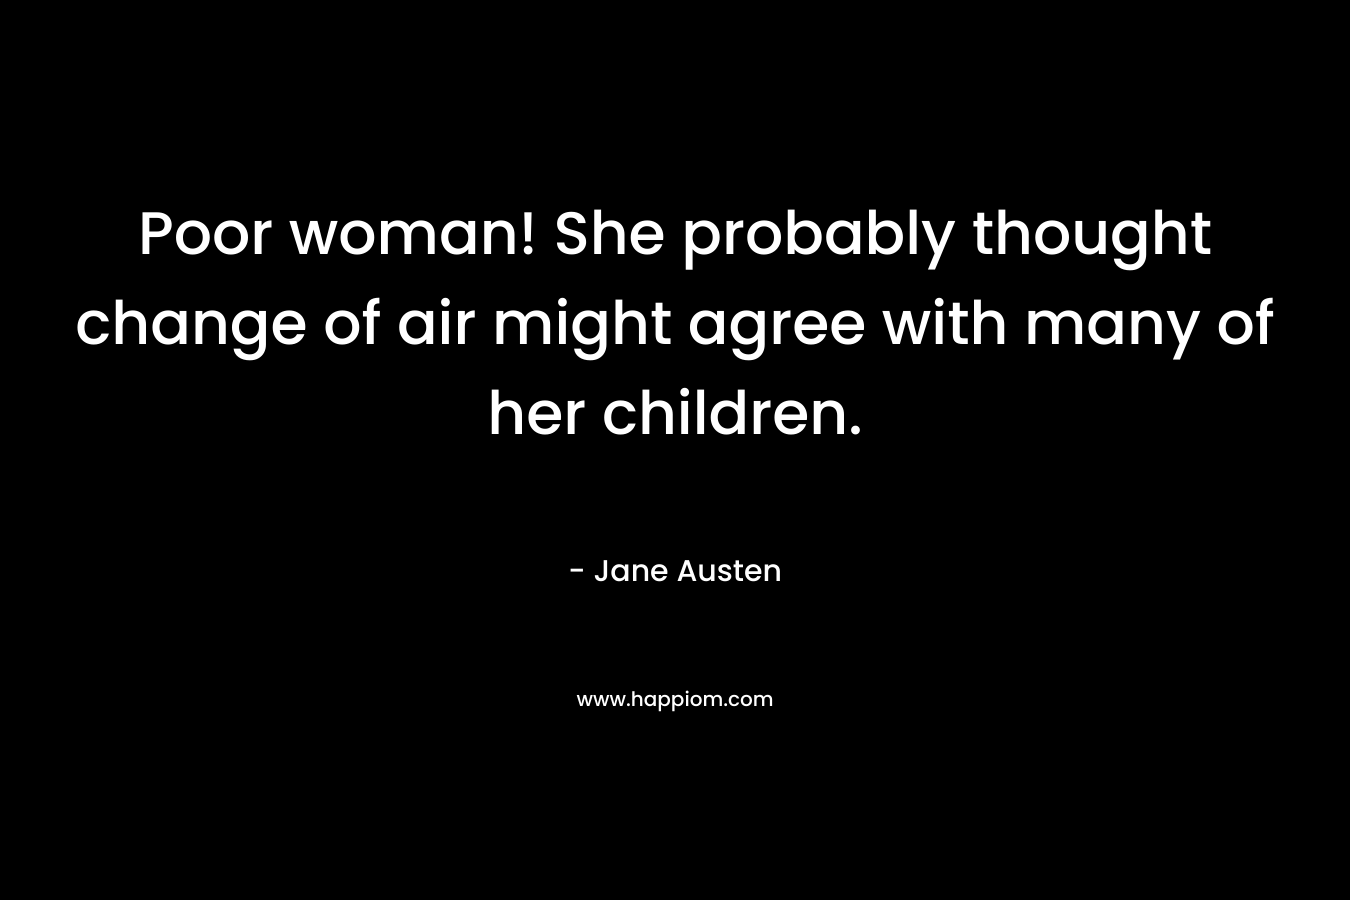 Poor woman! She probably thought change of air might agree with many of her children. – Jane Austen